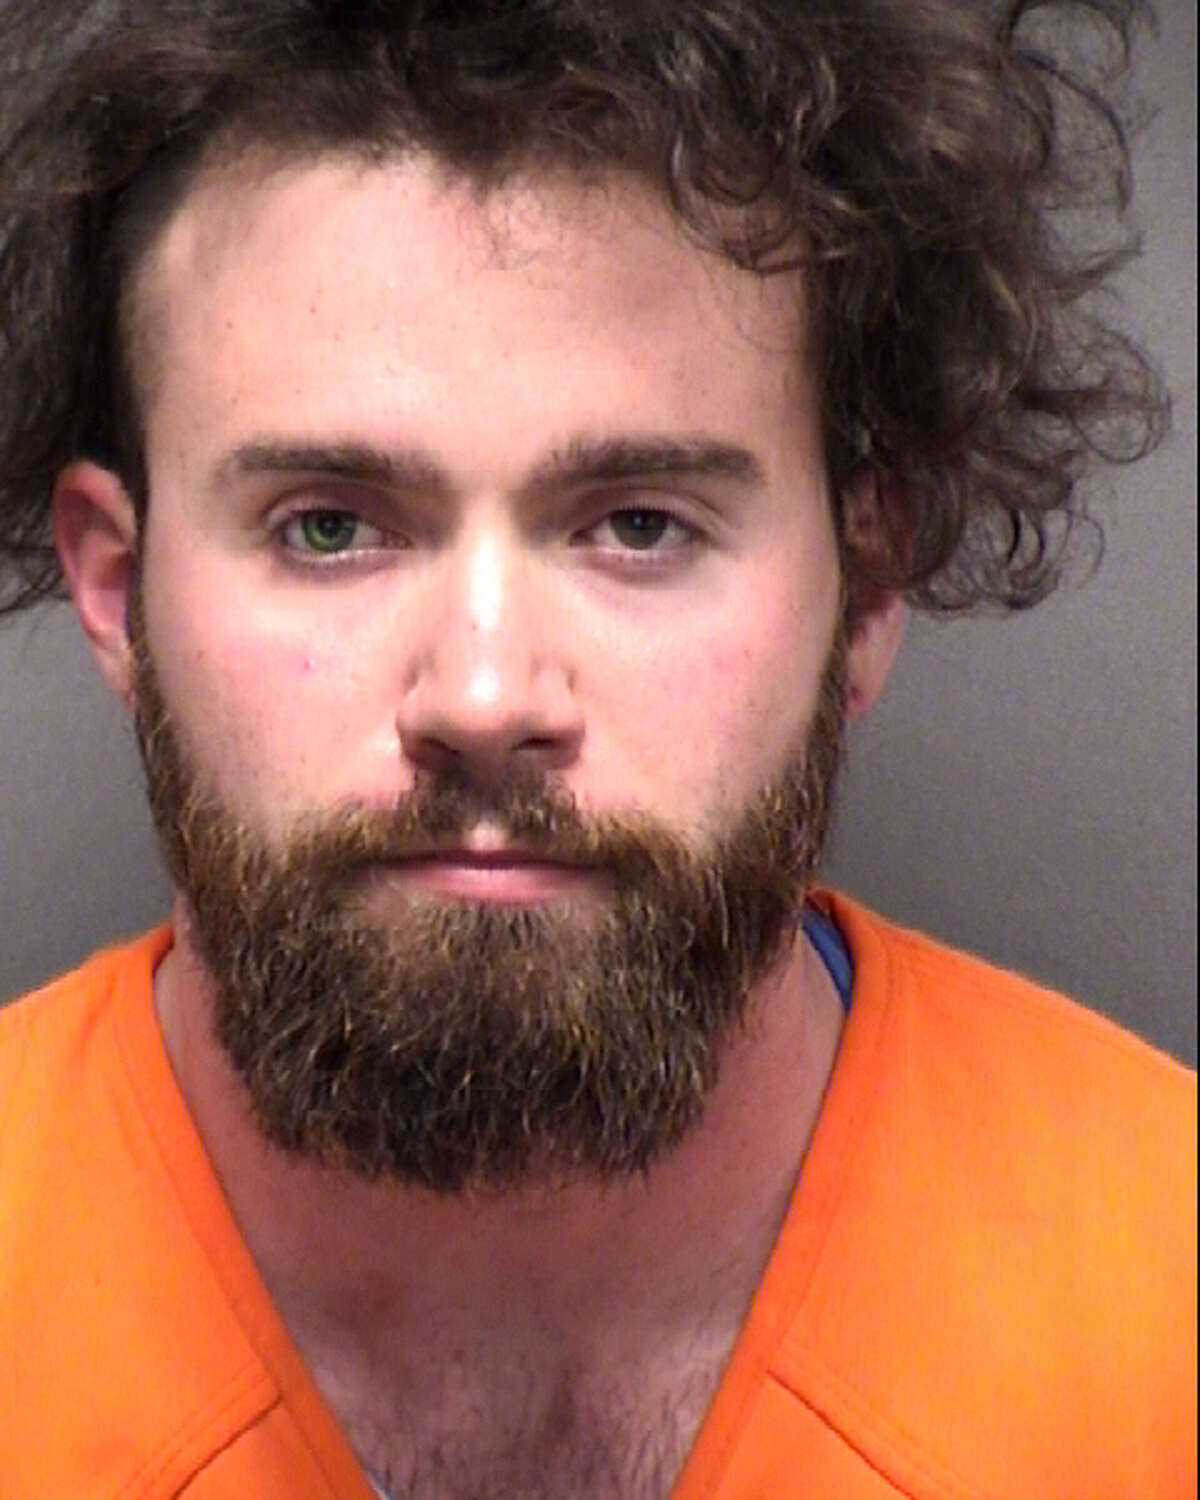 Ryan Stanush is currently facing a charge of aggravated assault causing serious bodily injury. Lt. Jeff Shook said his charges will be upgraded depending on the medical examiner's ruling on the death of the victim, Dorinda Ma.